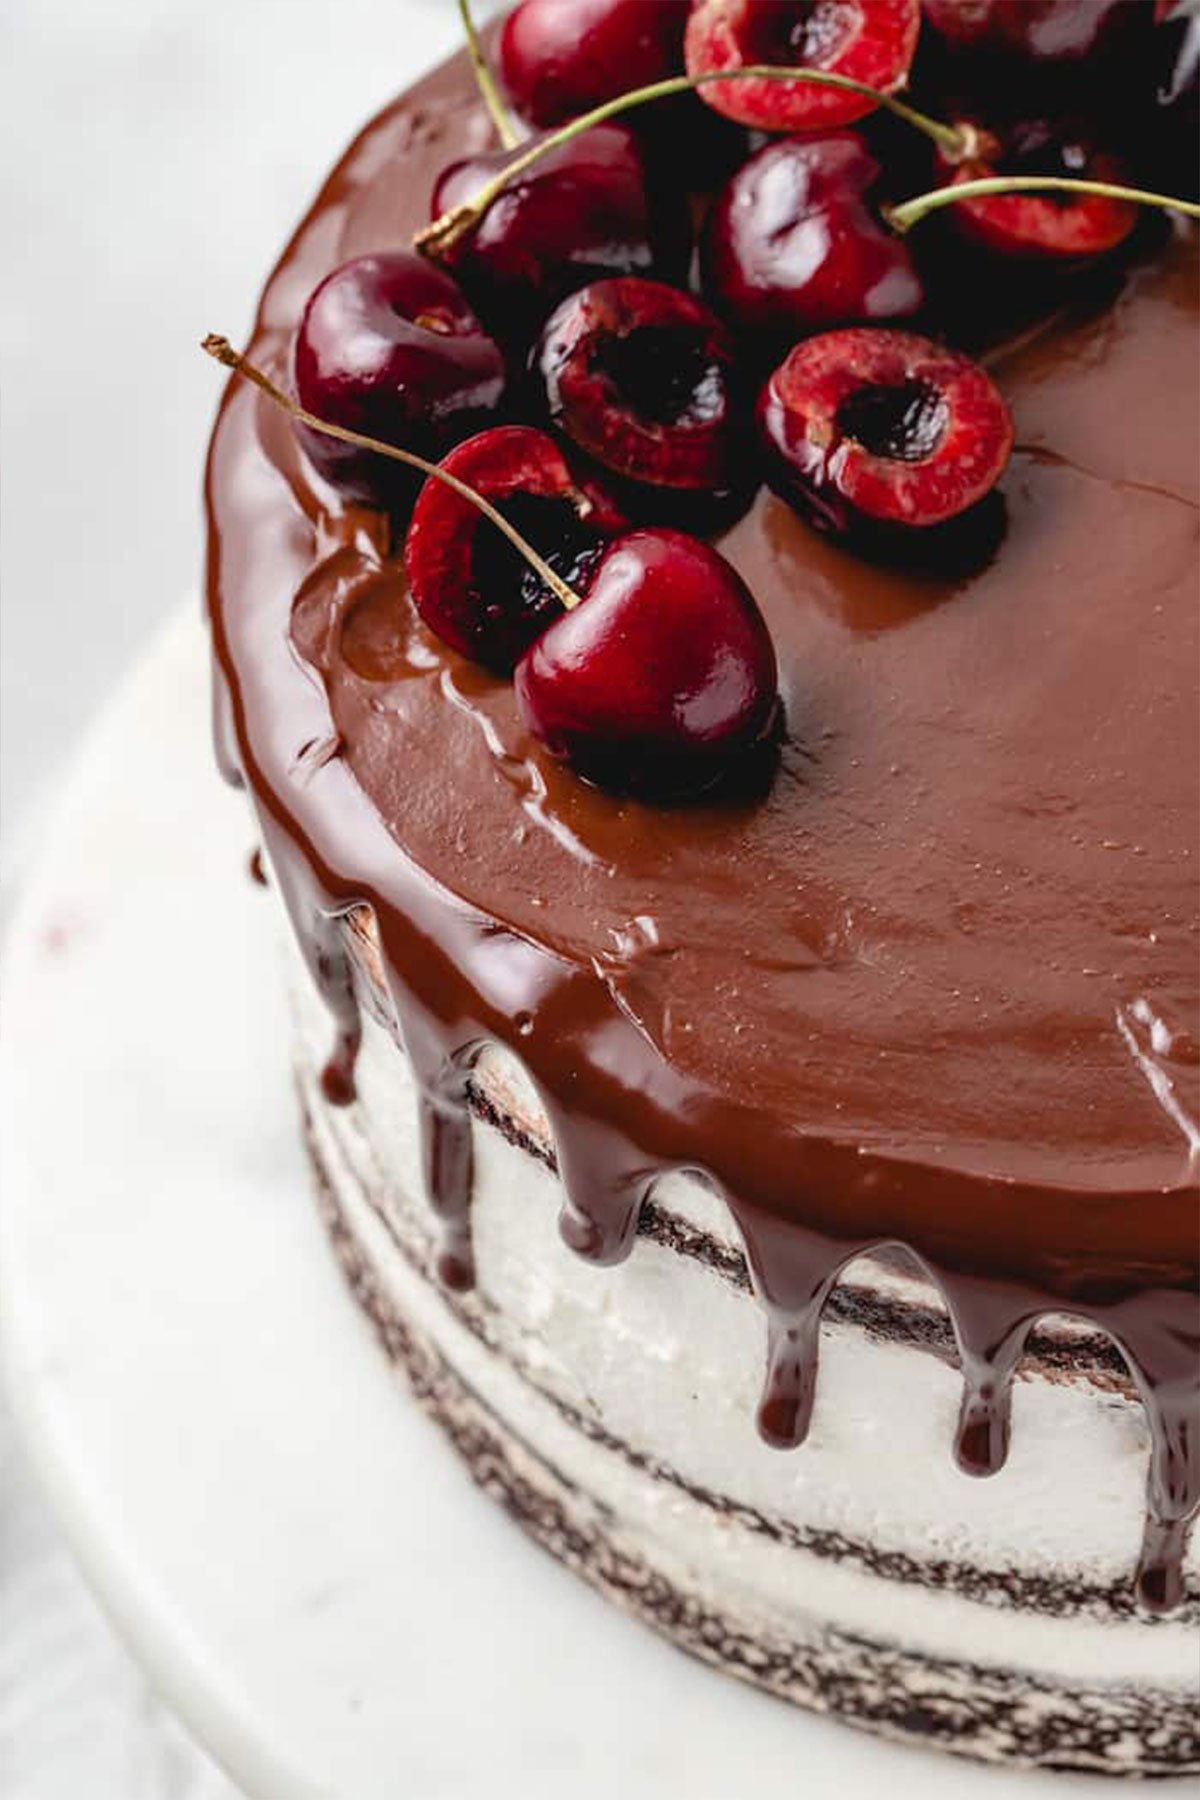 A close up of chocolate cake covered in whipped cream with chocolate ganache and cherries on top